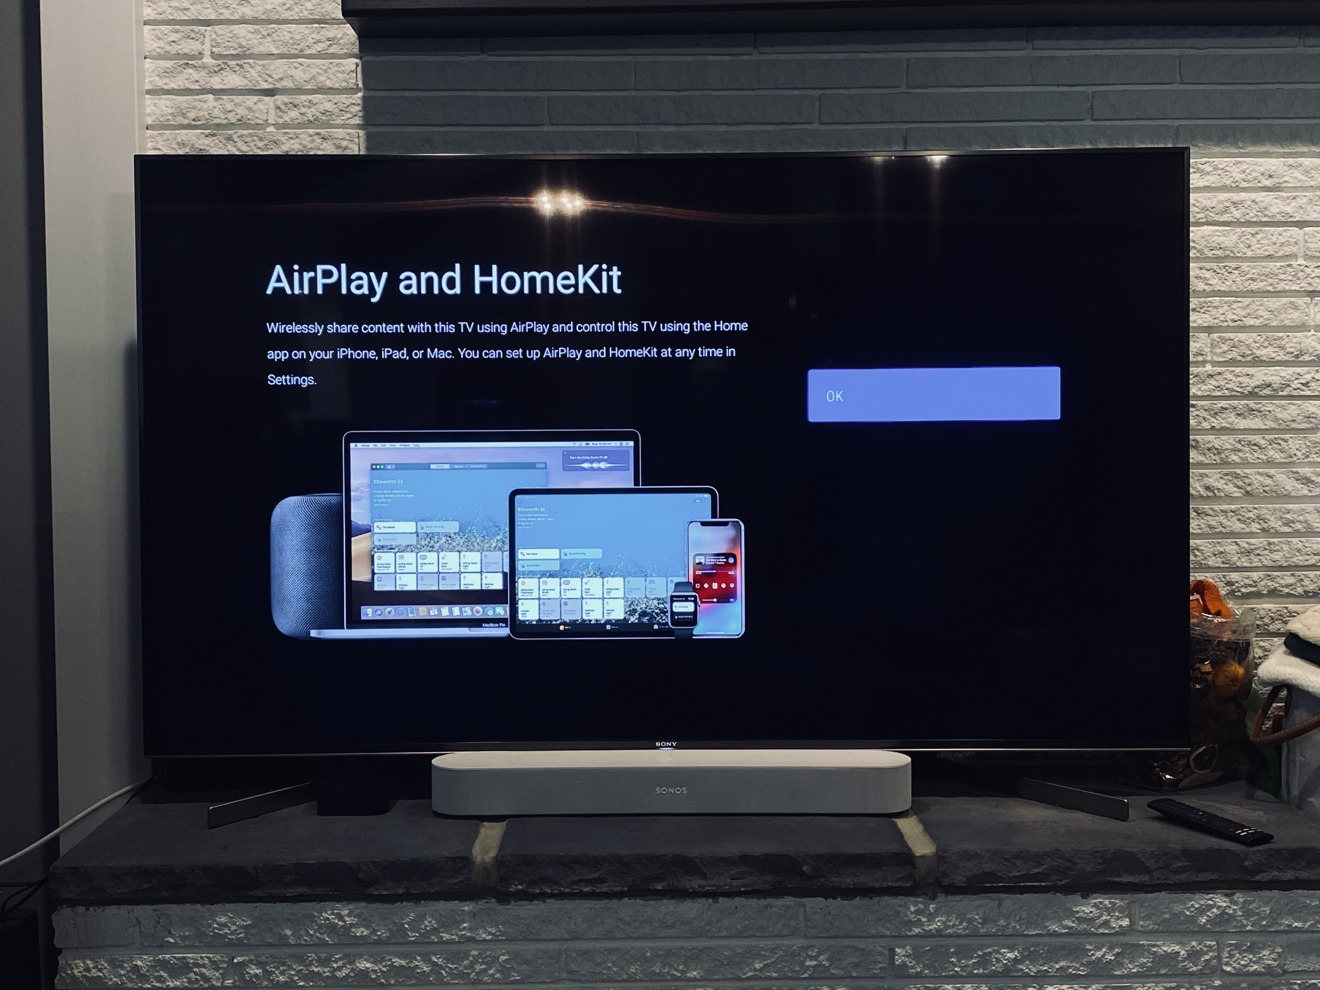 Hot And Airplay 2 On Sony Smart Tvs, Screen Mirroring Ipad To Sony Bravia